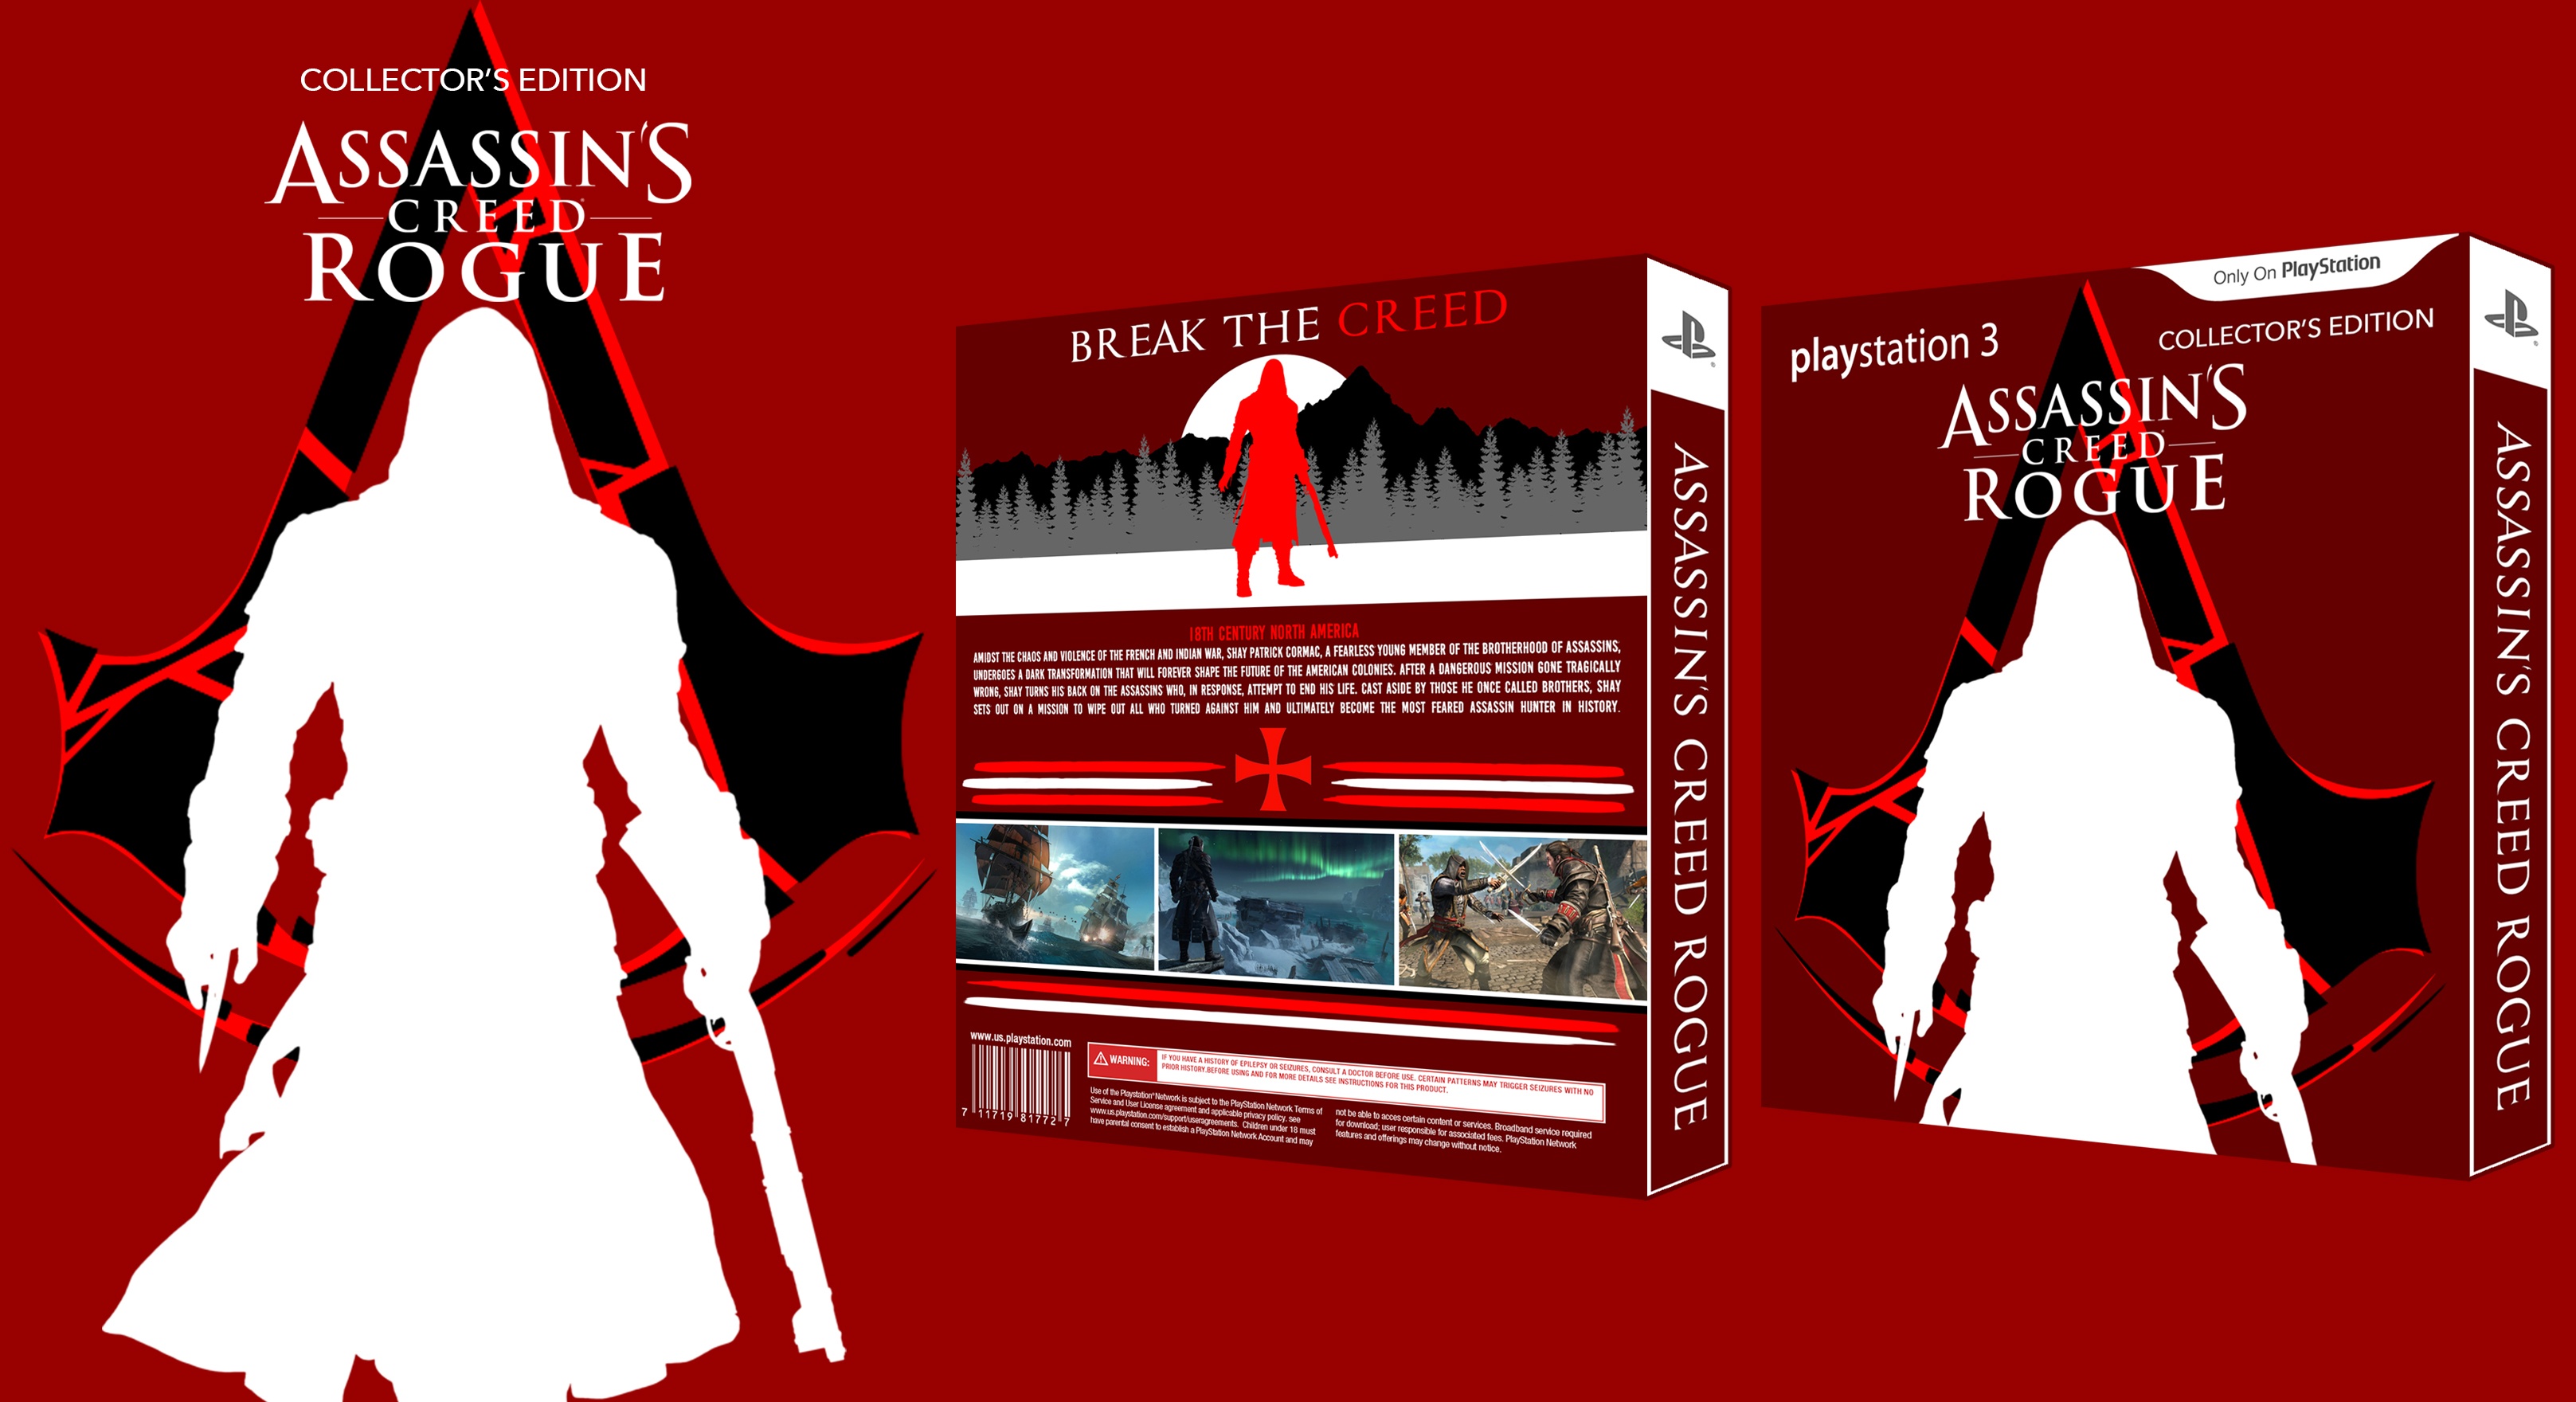 Assassins Creed Remastered PS5 Cover by sgd1329 on DeviantArt